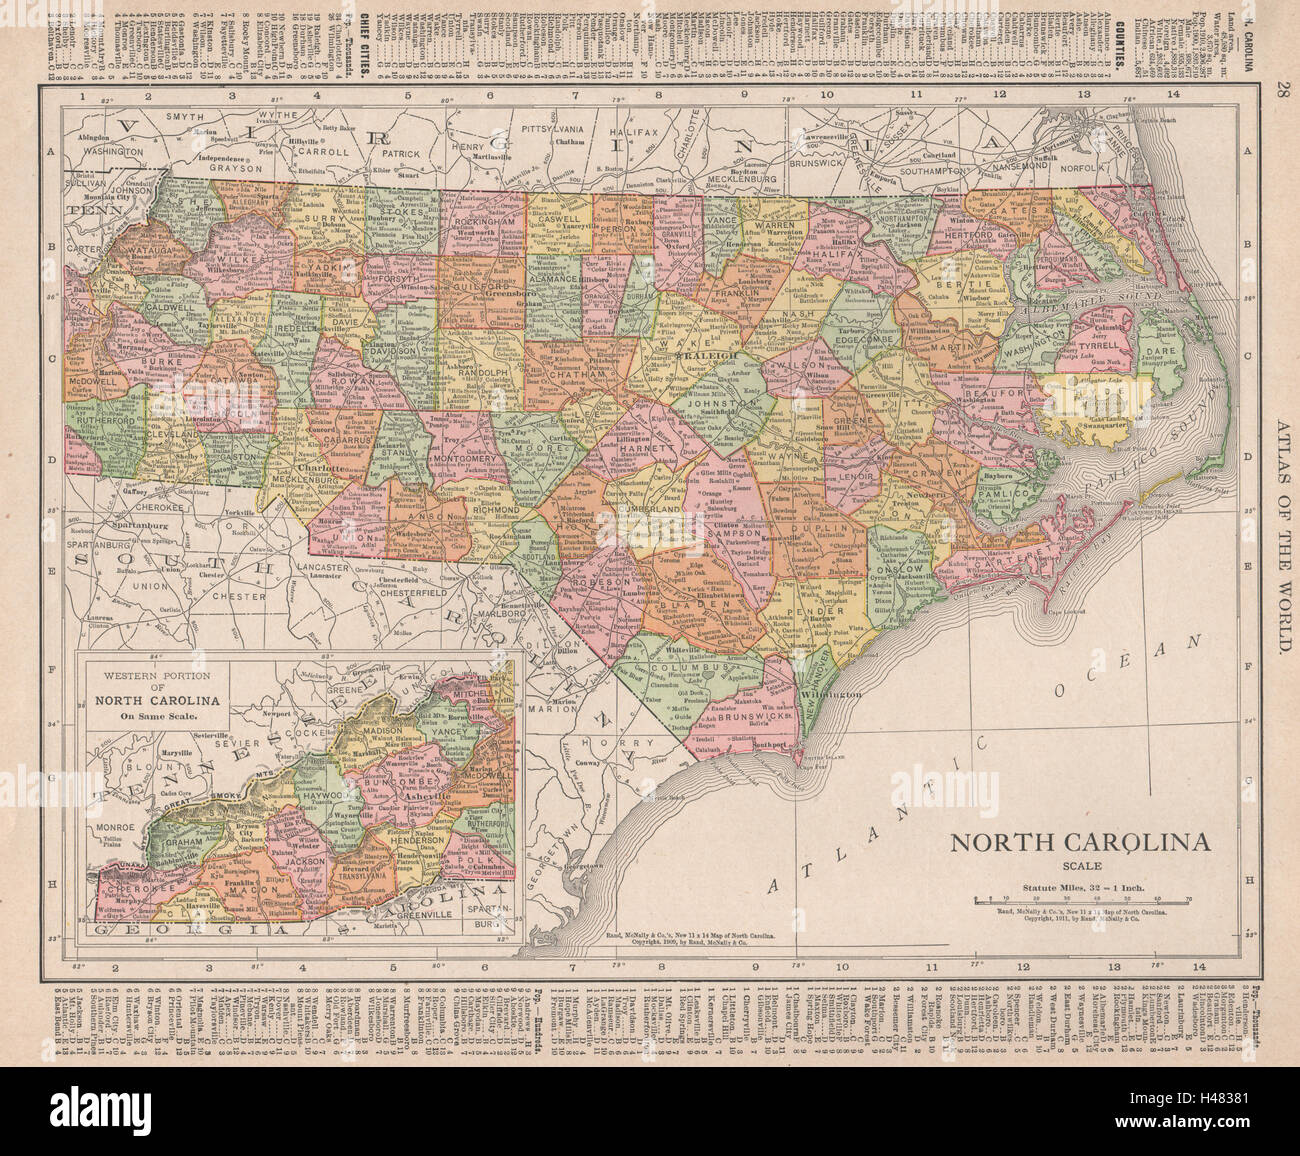 North Carolina state map showing counties. RAND MCNALLY 1912 old antique Stock Photo